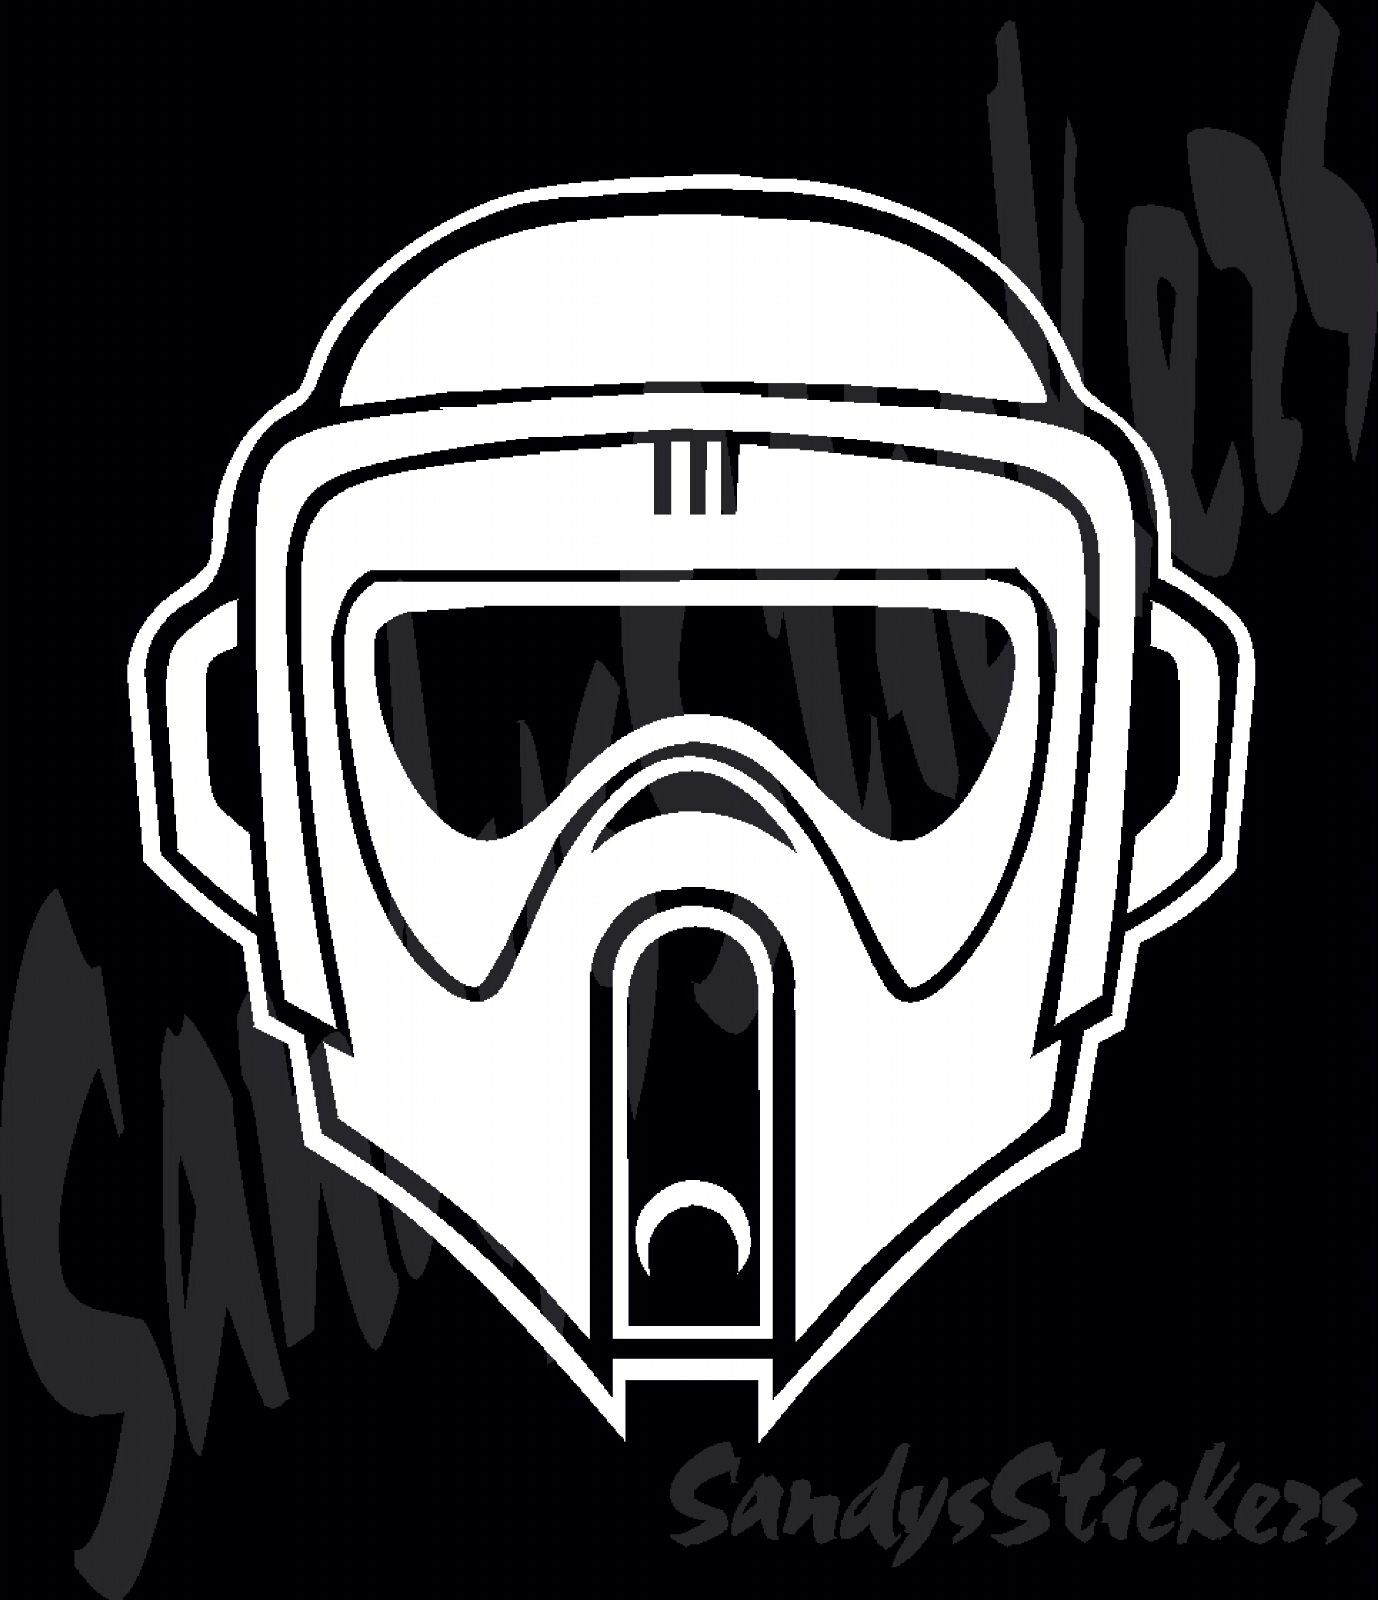 2 STAR WARS SCOUT TROOPER Vinyl Decals Stickers - Many Colors  storm trooper